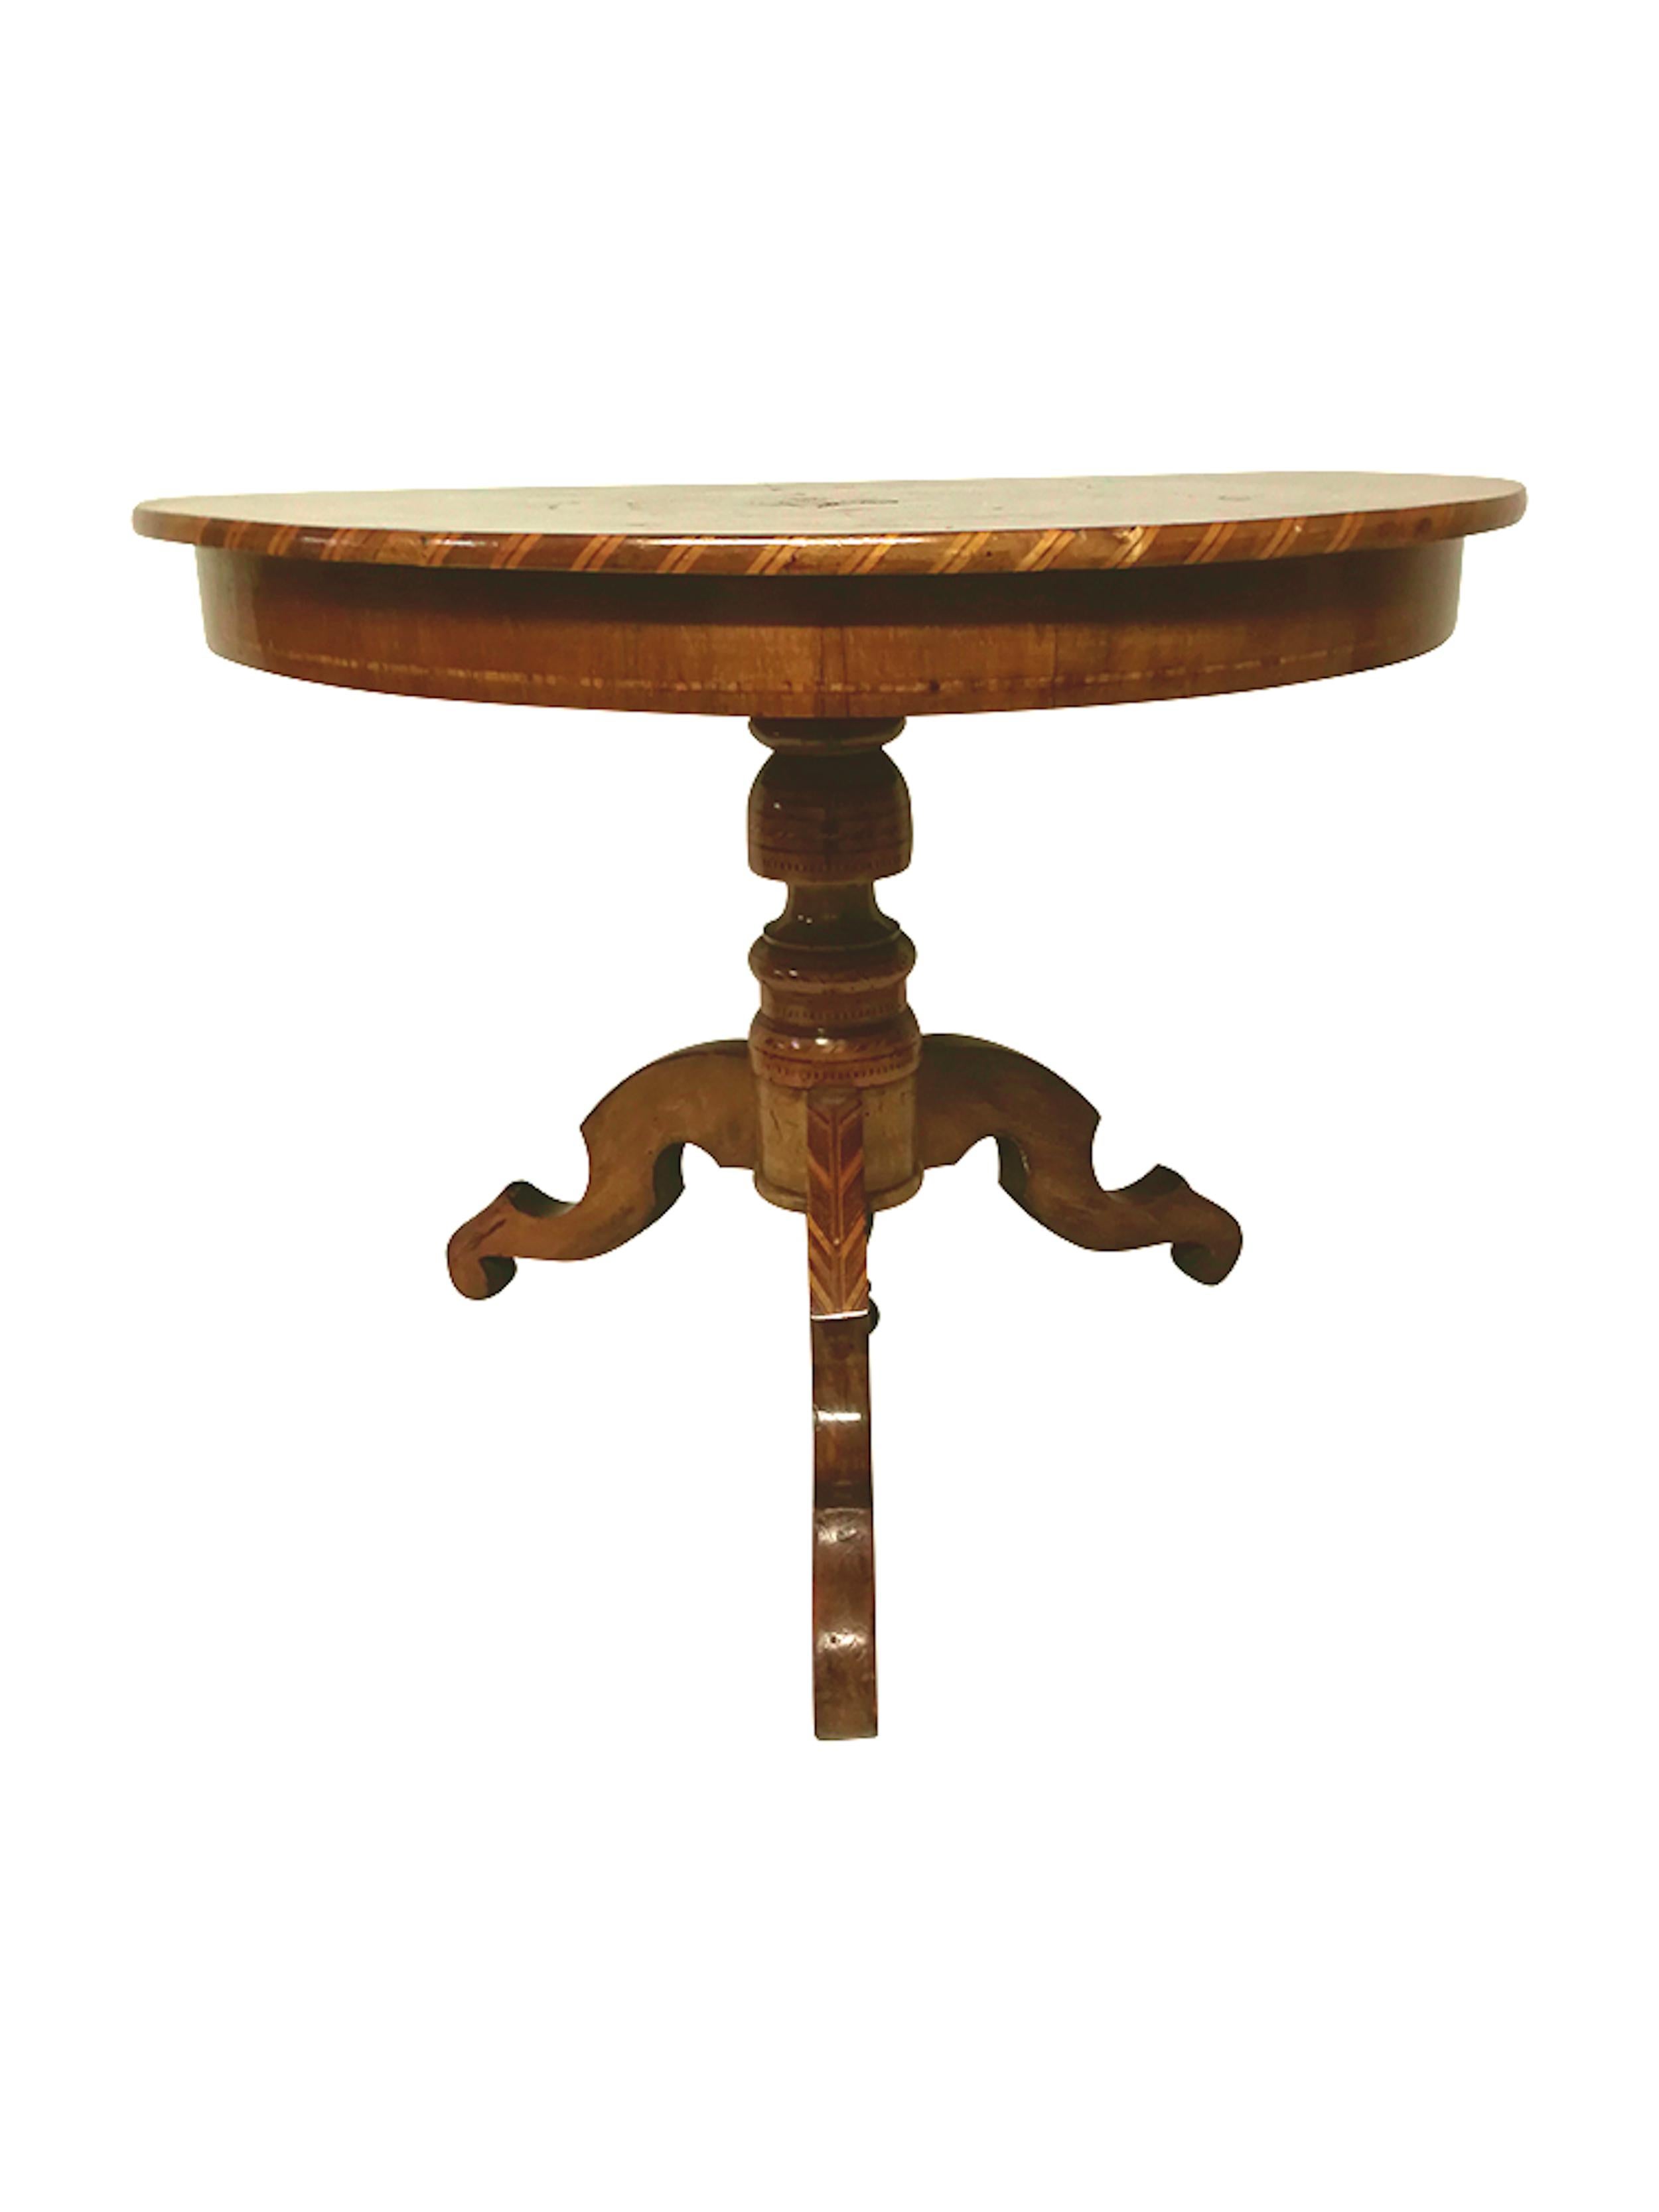 Guéridon Table in Dutch Marquetery 19th Century In Good Condition For Sale In Beuzevillette, FR